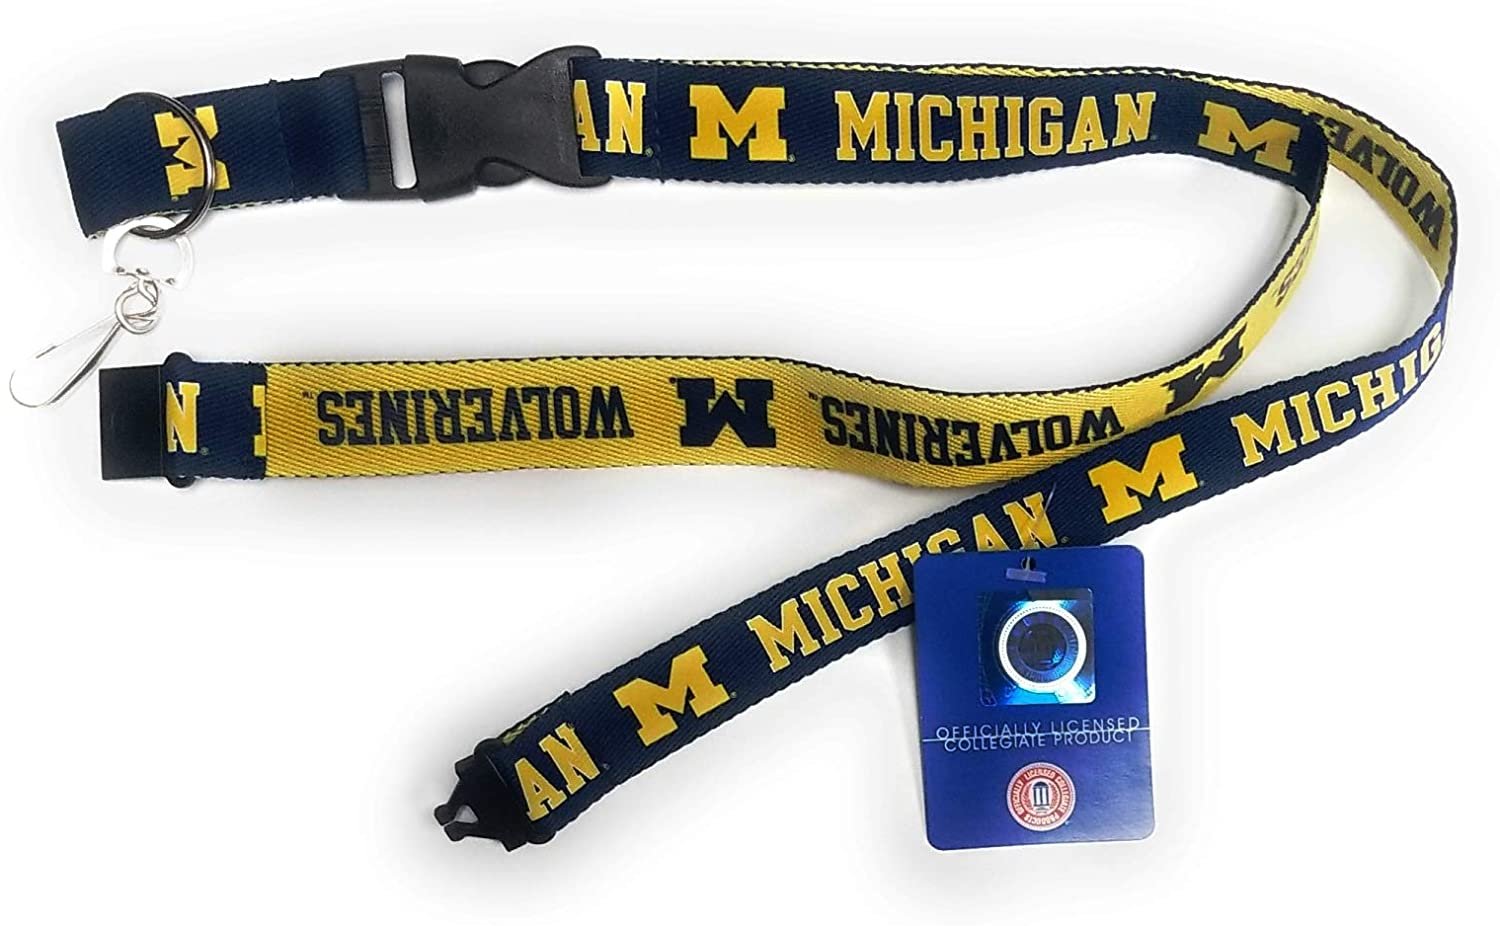 University of Michigan Wolverines Lanyard Keychain Double Sided Breakaway Safety Design Adult 18 Inch